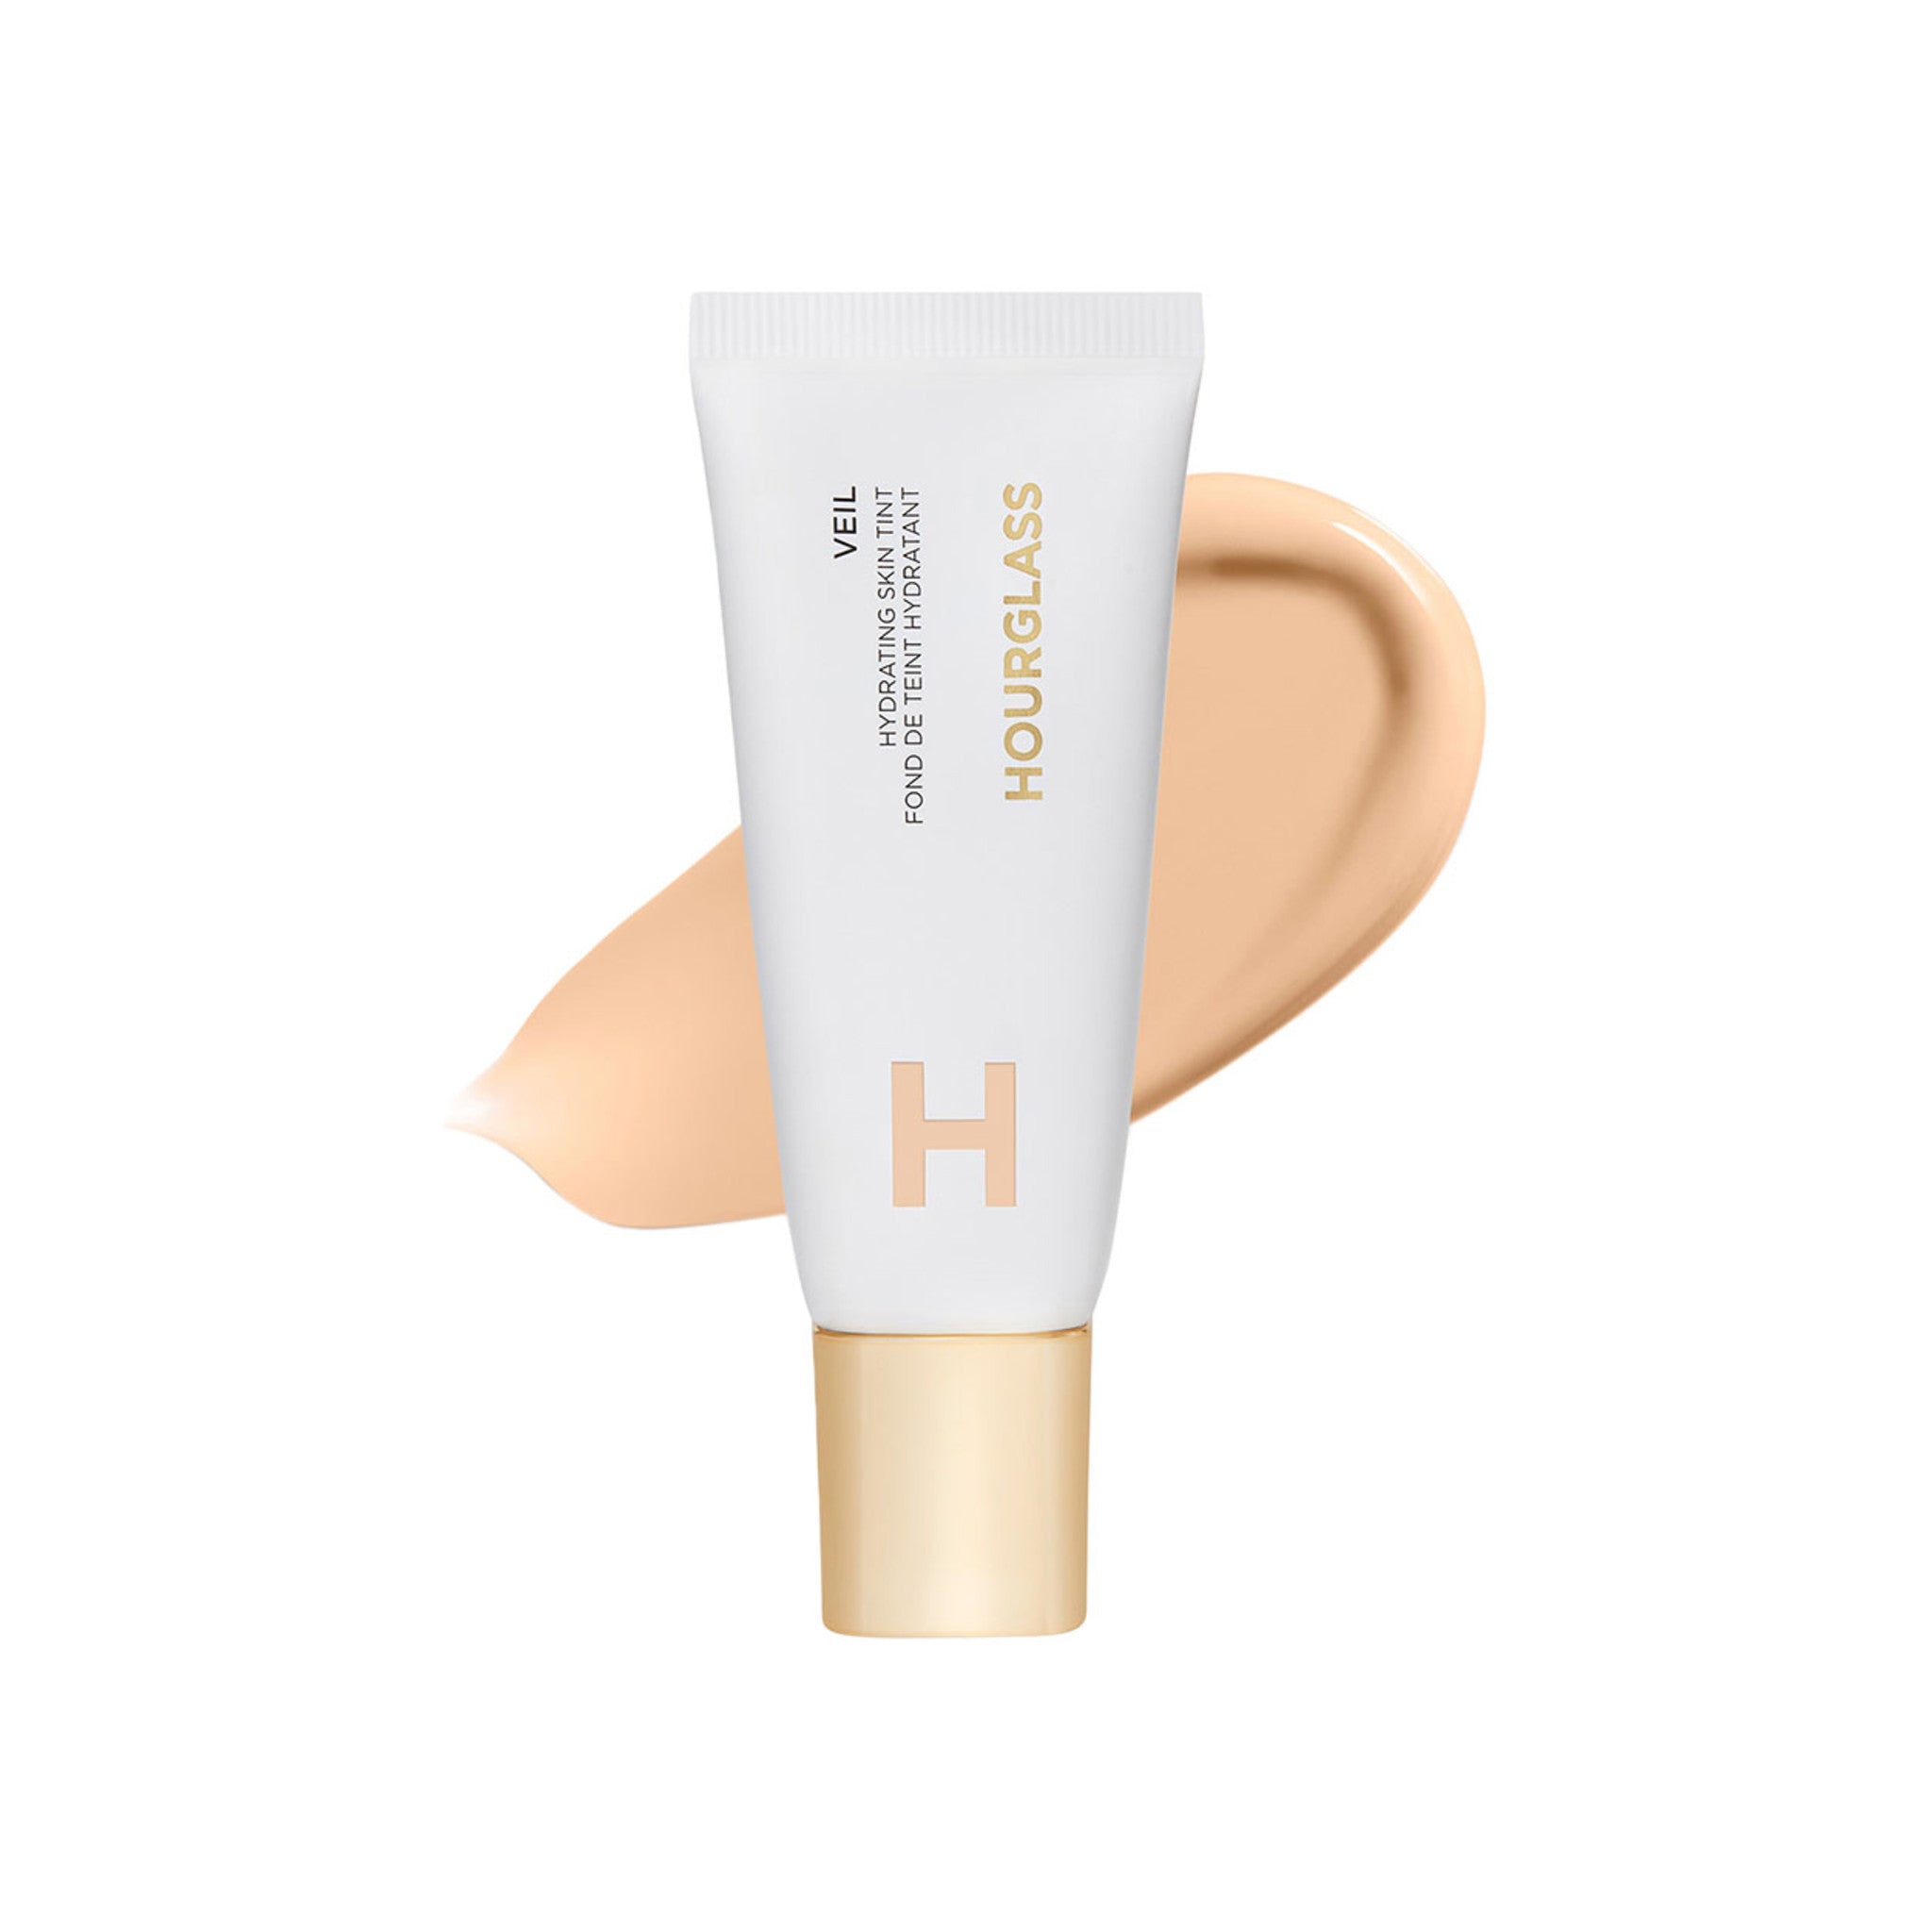 Hourglass Veil Hydrating Skin Tint Color/Shade variant: 1 main image.